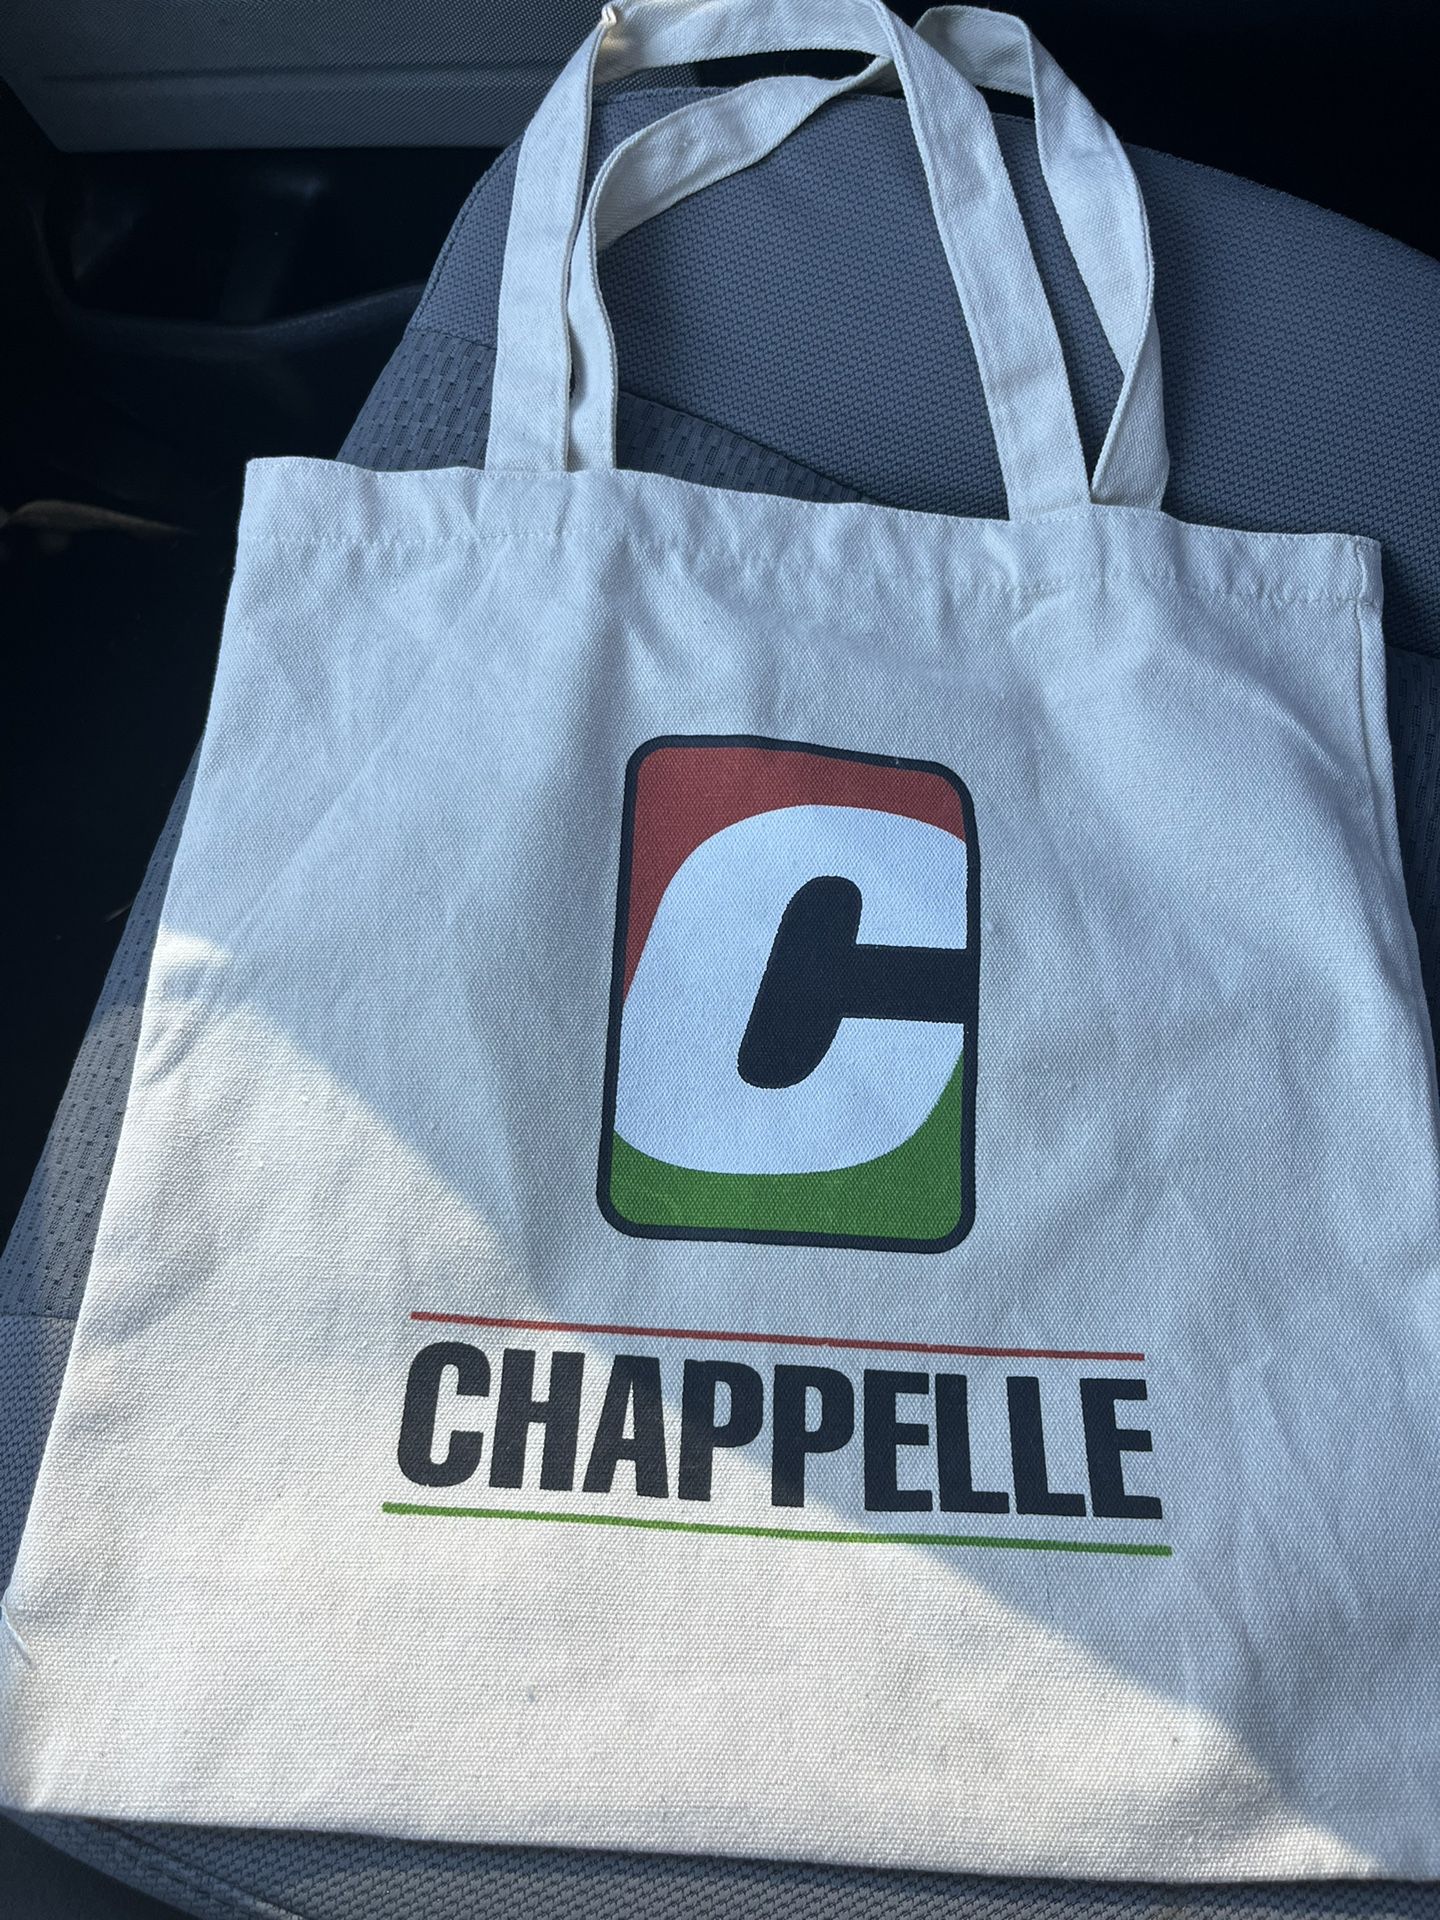 Dave Chappelle Tote Bag for Sale in Upland, CA - OfferUp